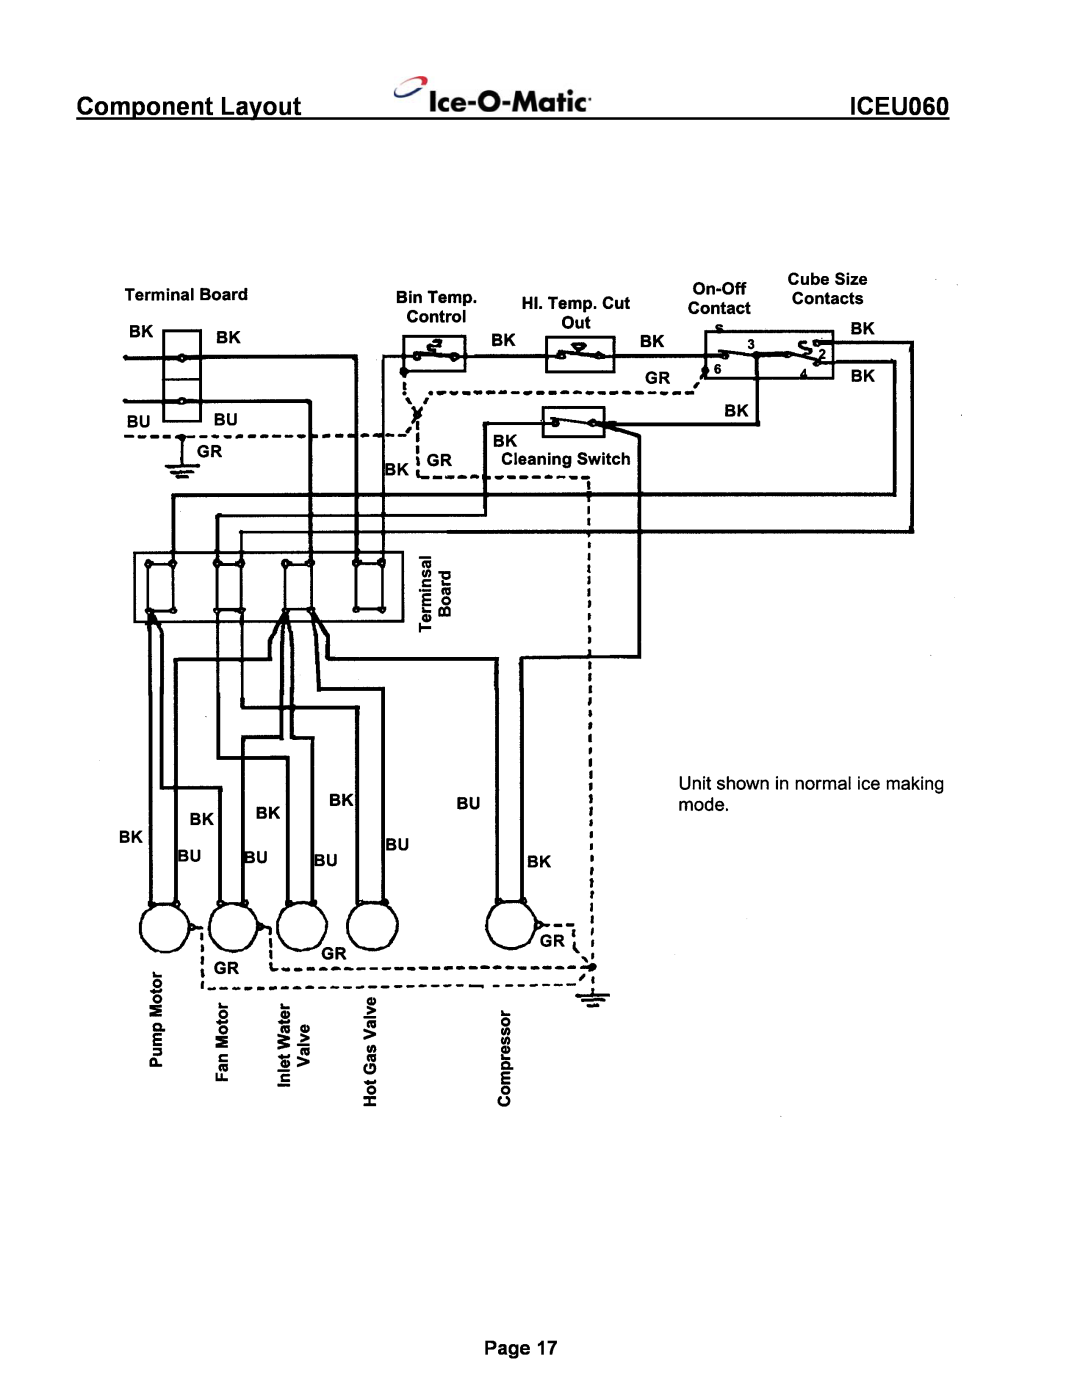 Ice-O-Matic ICEU060 installation manual Component Layout, Page 